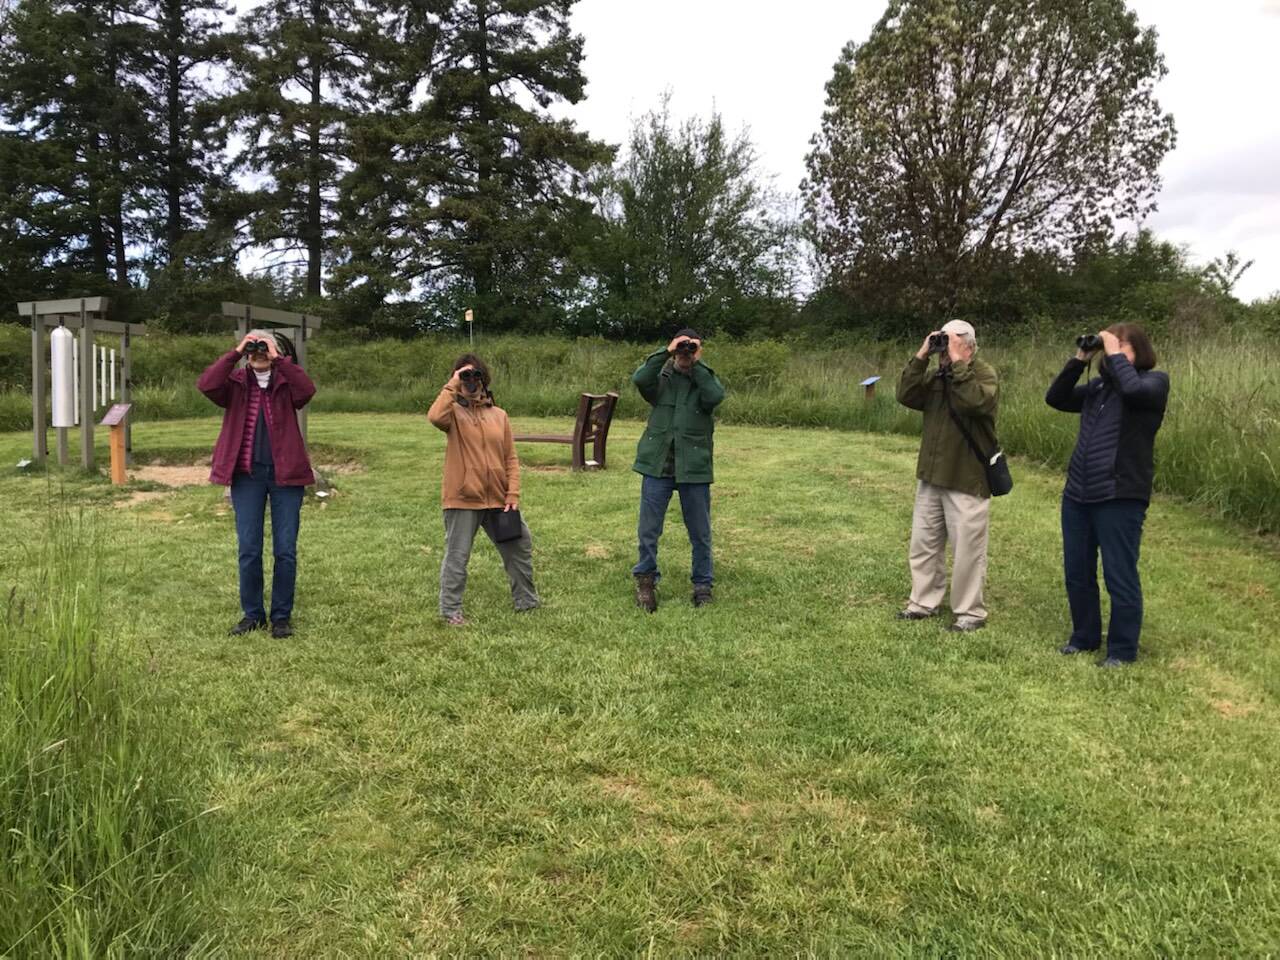 Contributed photo
Birdwatchers are ready and watching at the park.